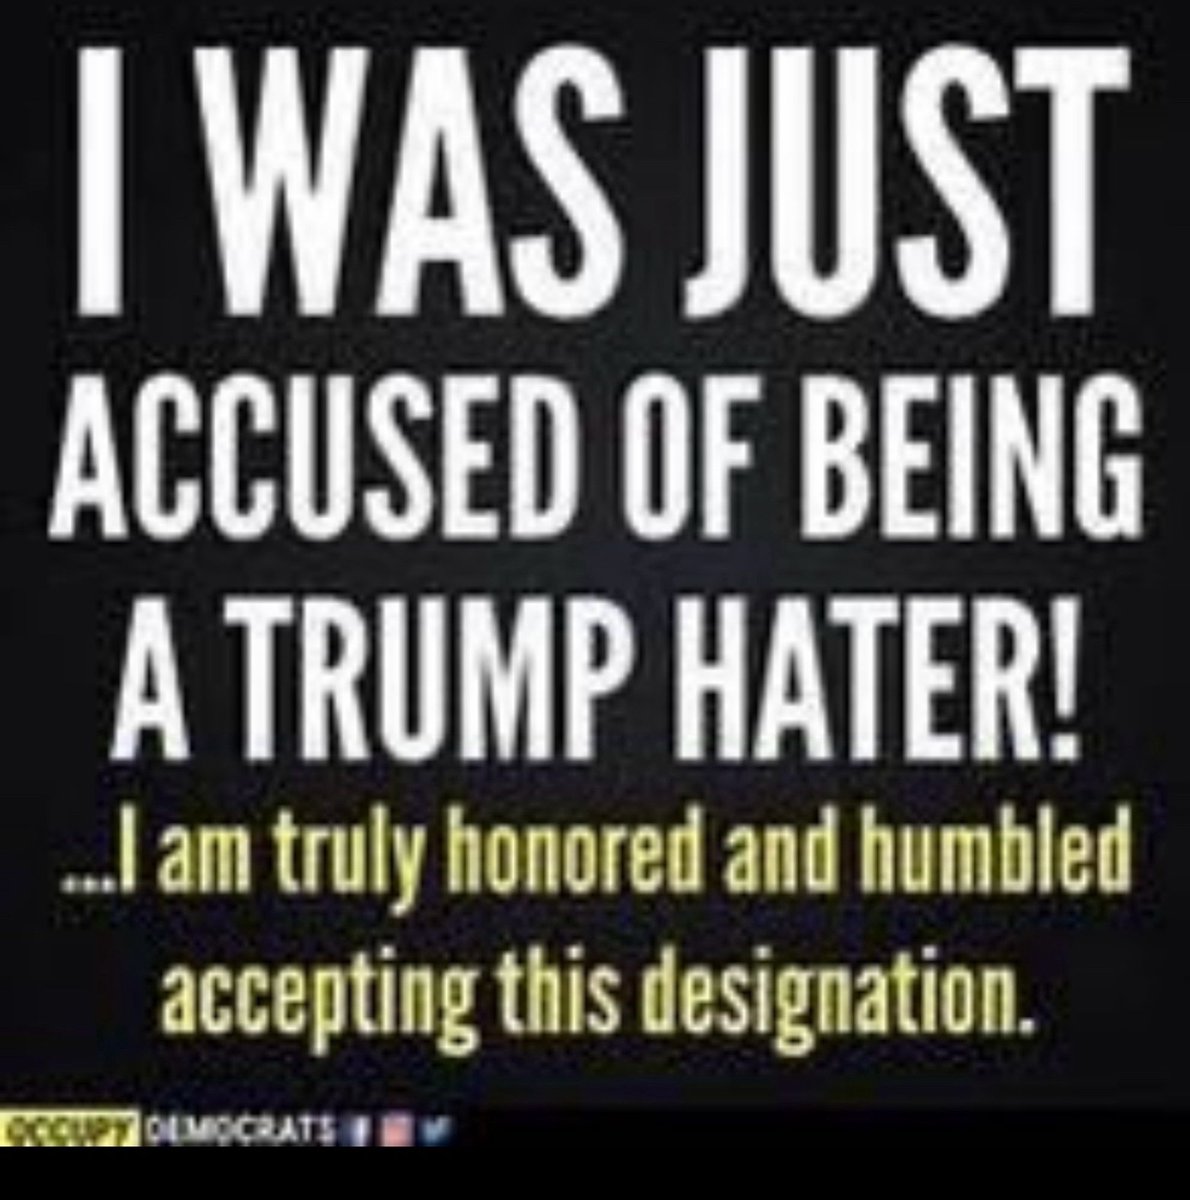 I'm honored to be a rTump hater..

Who else is....✋🏼